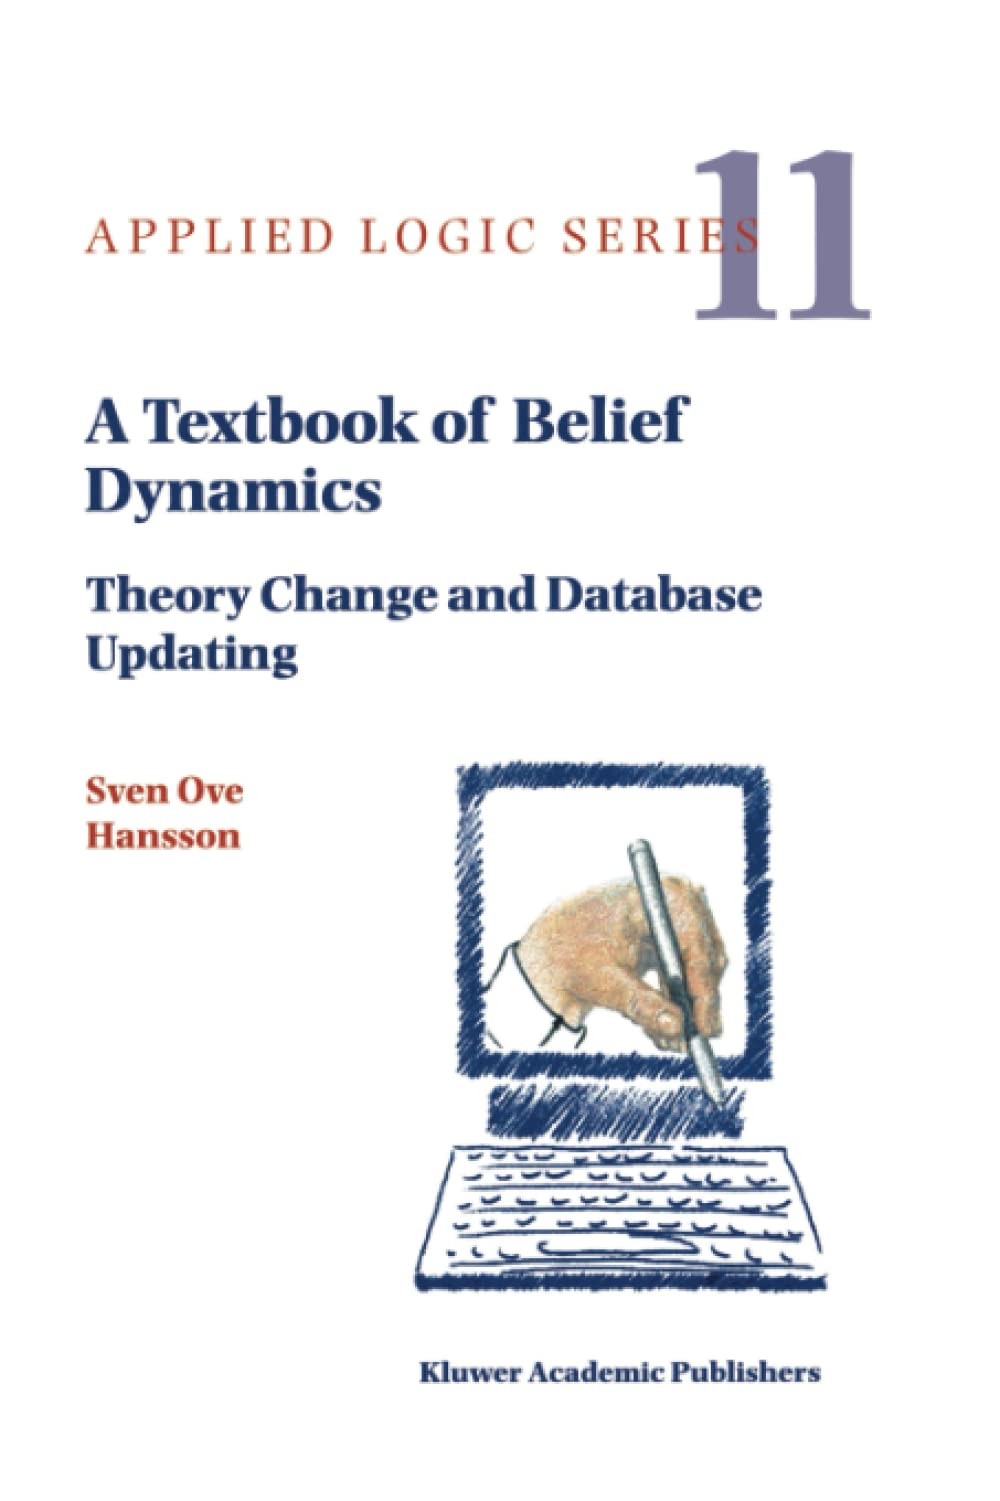 A Textbook of Belief Dynamics: Solutions to Exercises